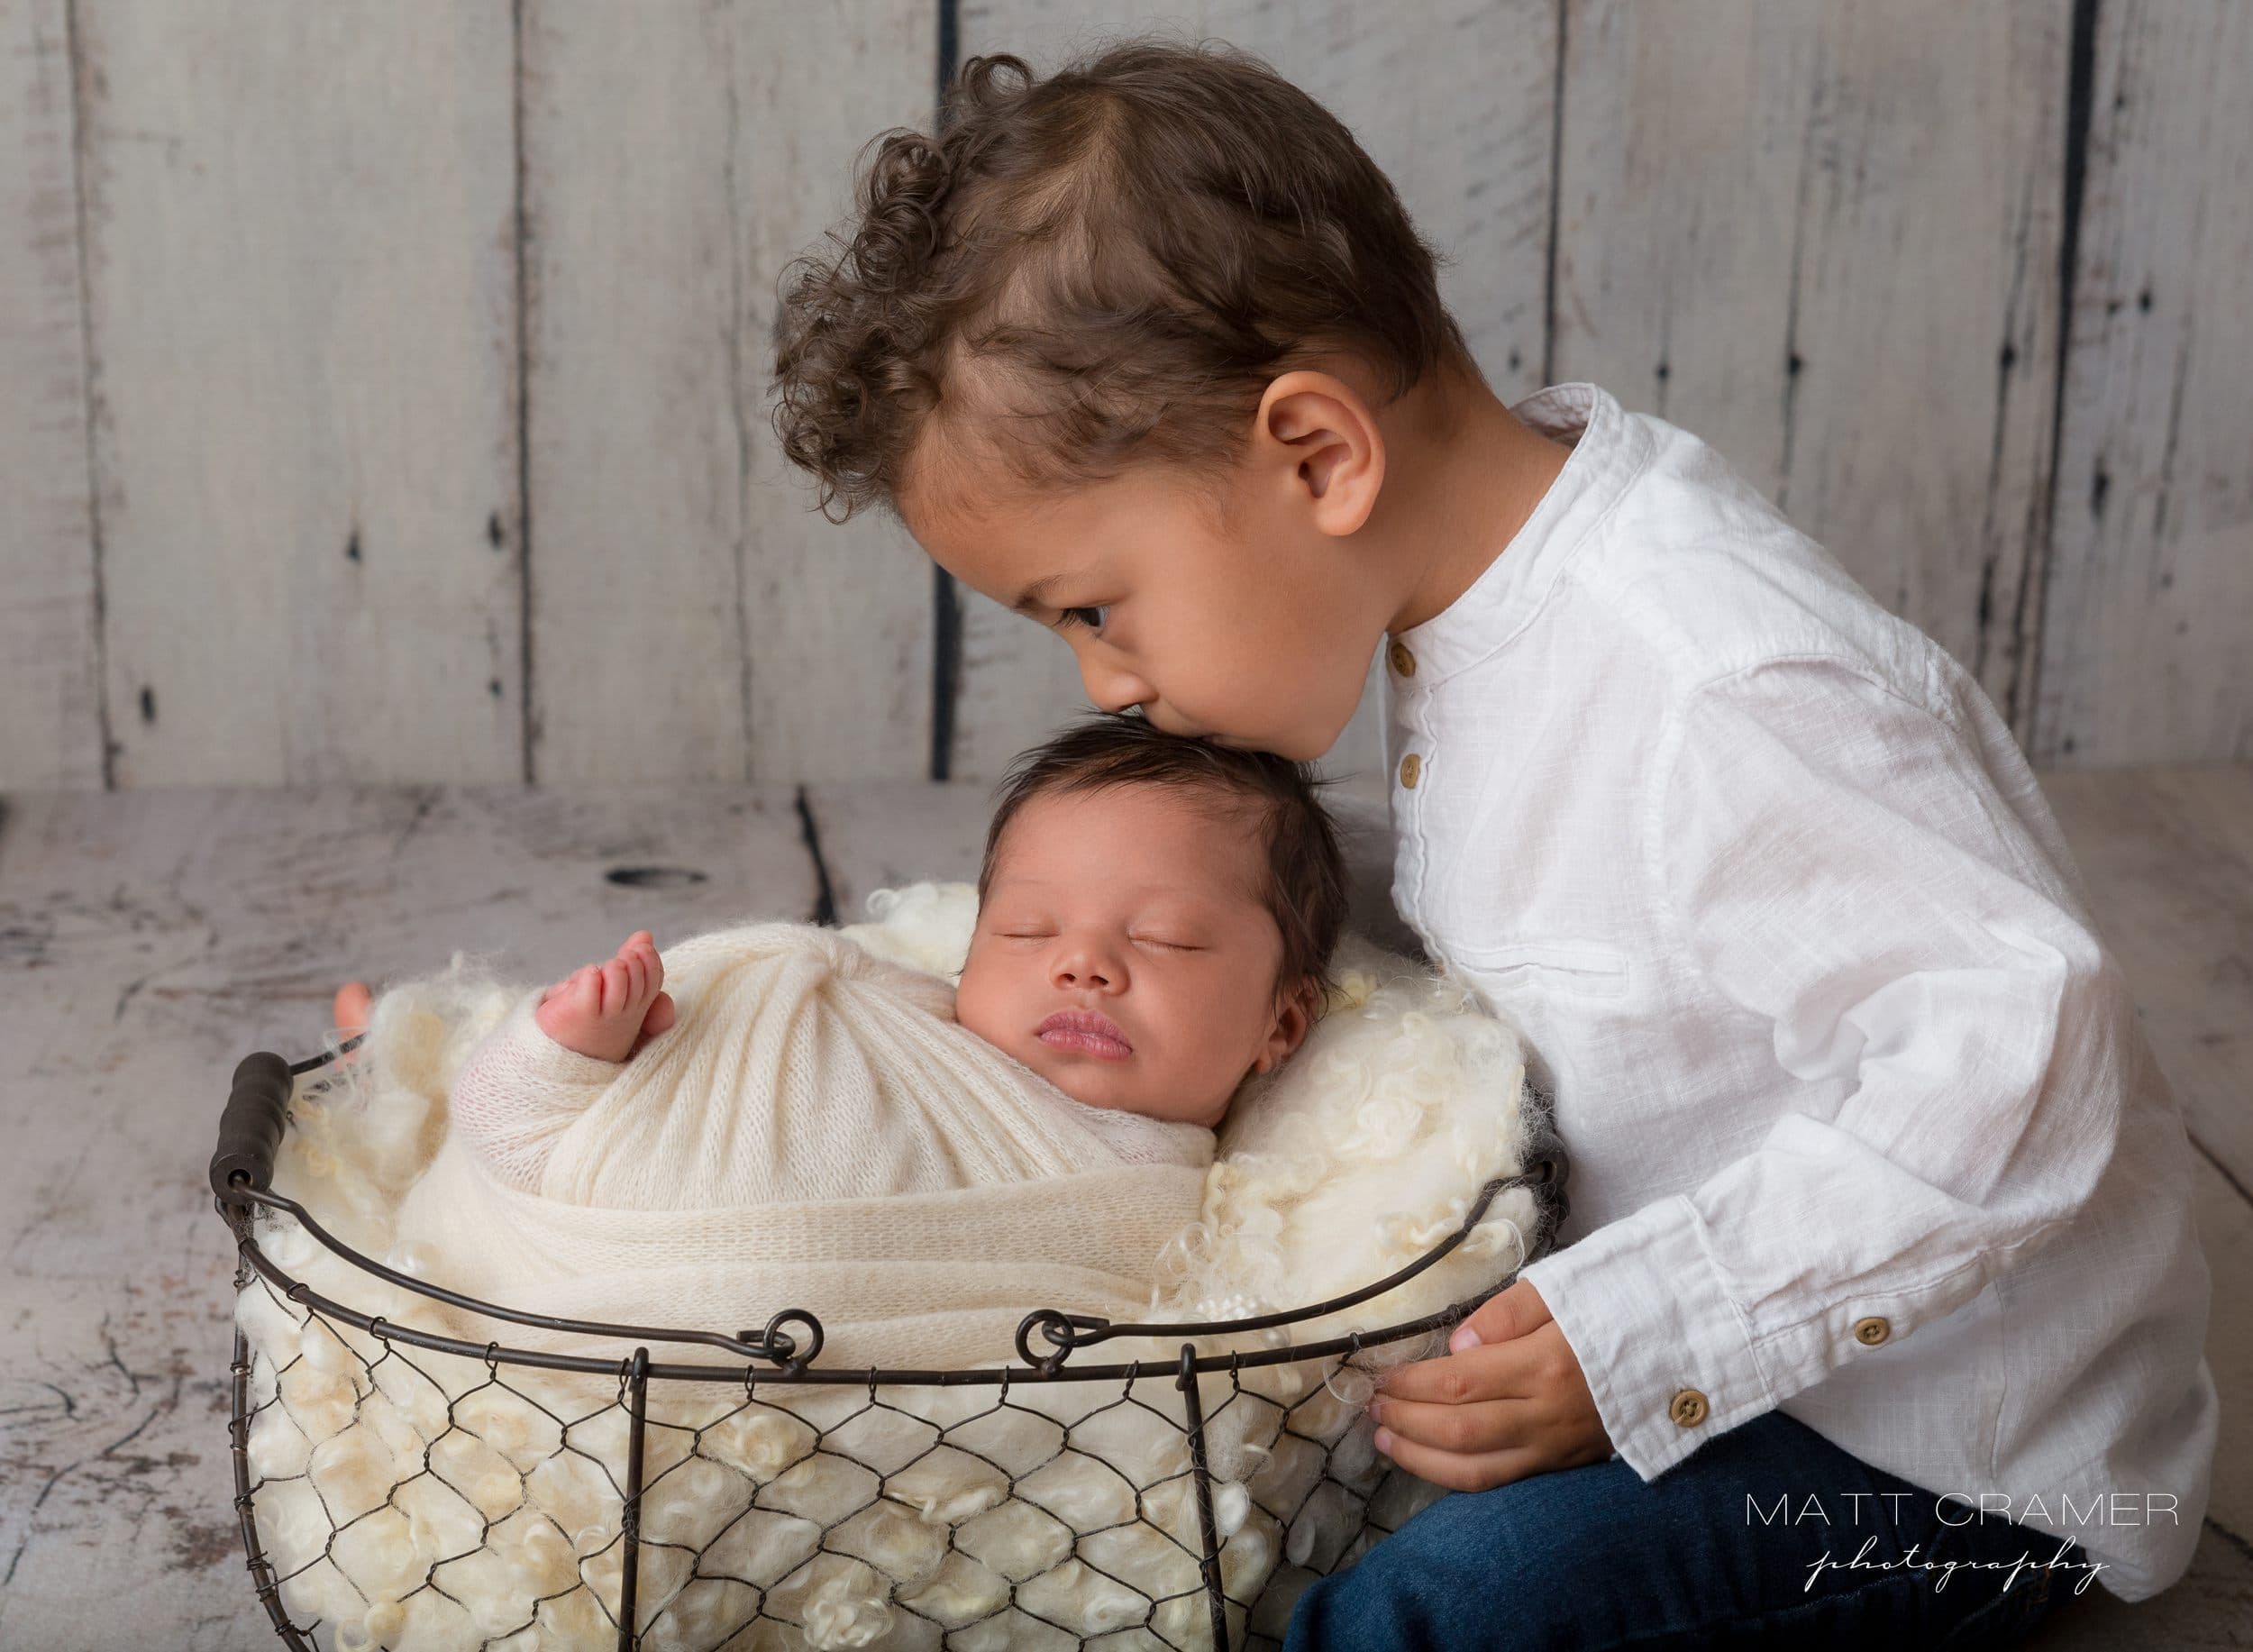 Toddler sibling kissing baby newborn brother